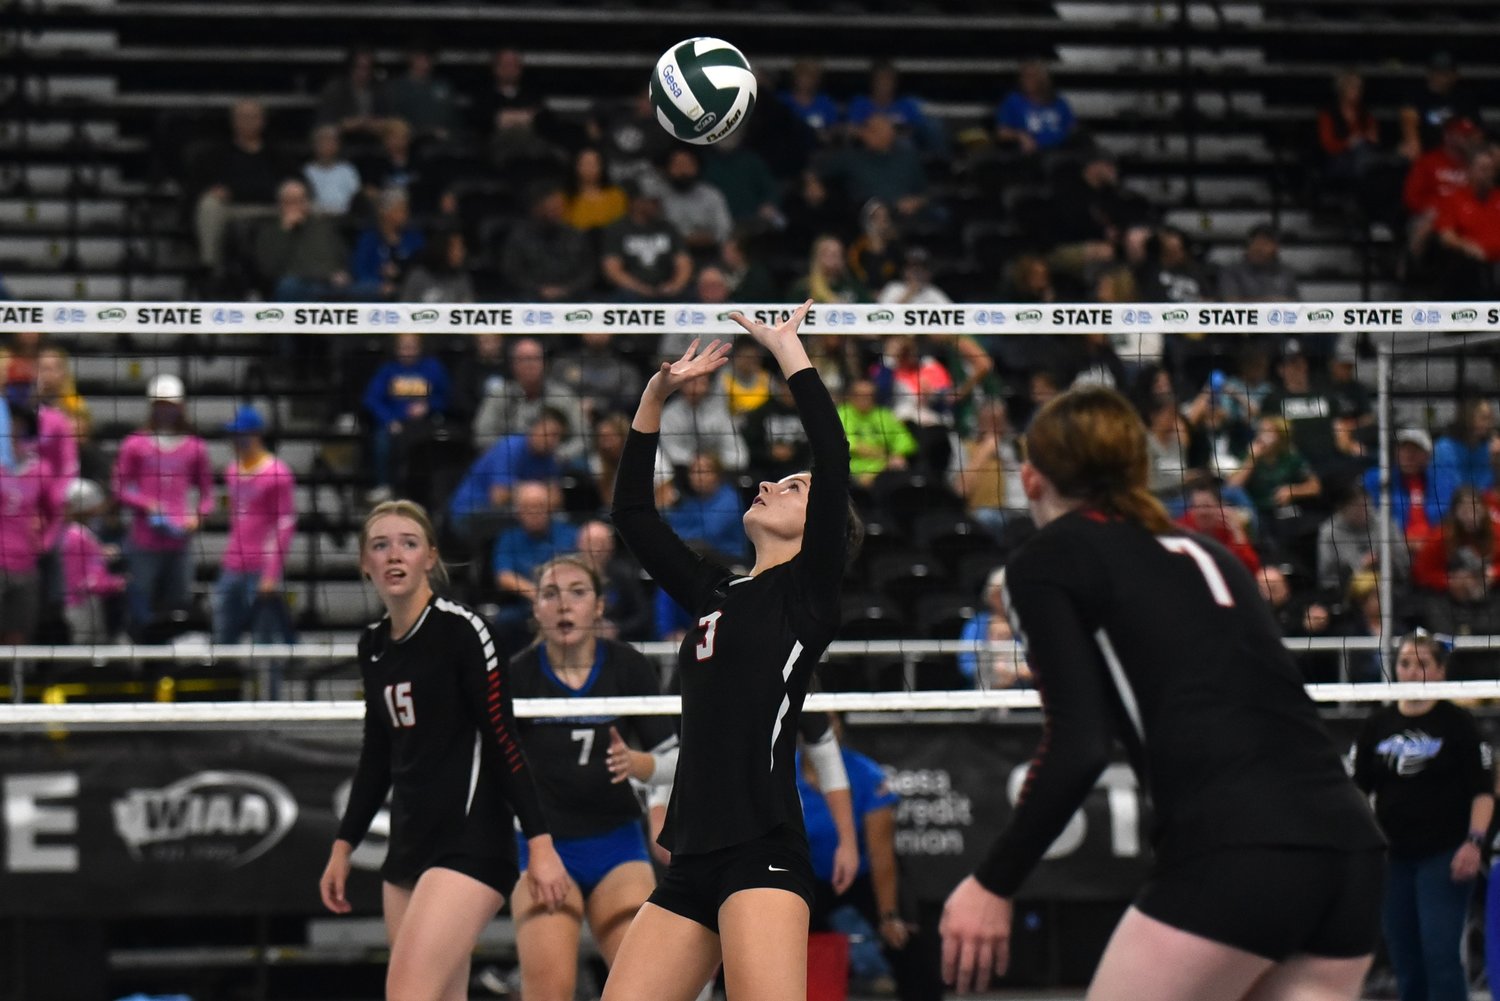 Erin Couryner puts up a pass during Mossyrock's three-set loss to No. 1 Oakesdale in the 1B state title game, on Nov. 11 in Yakima.